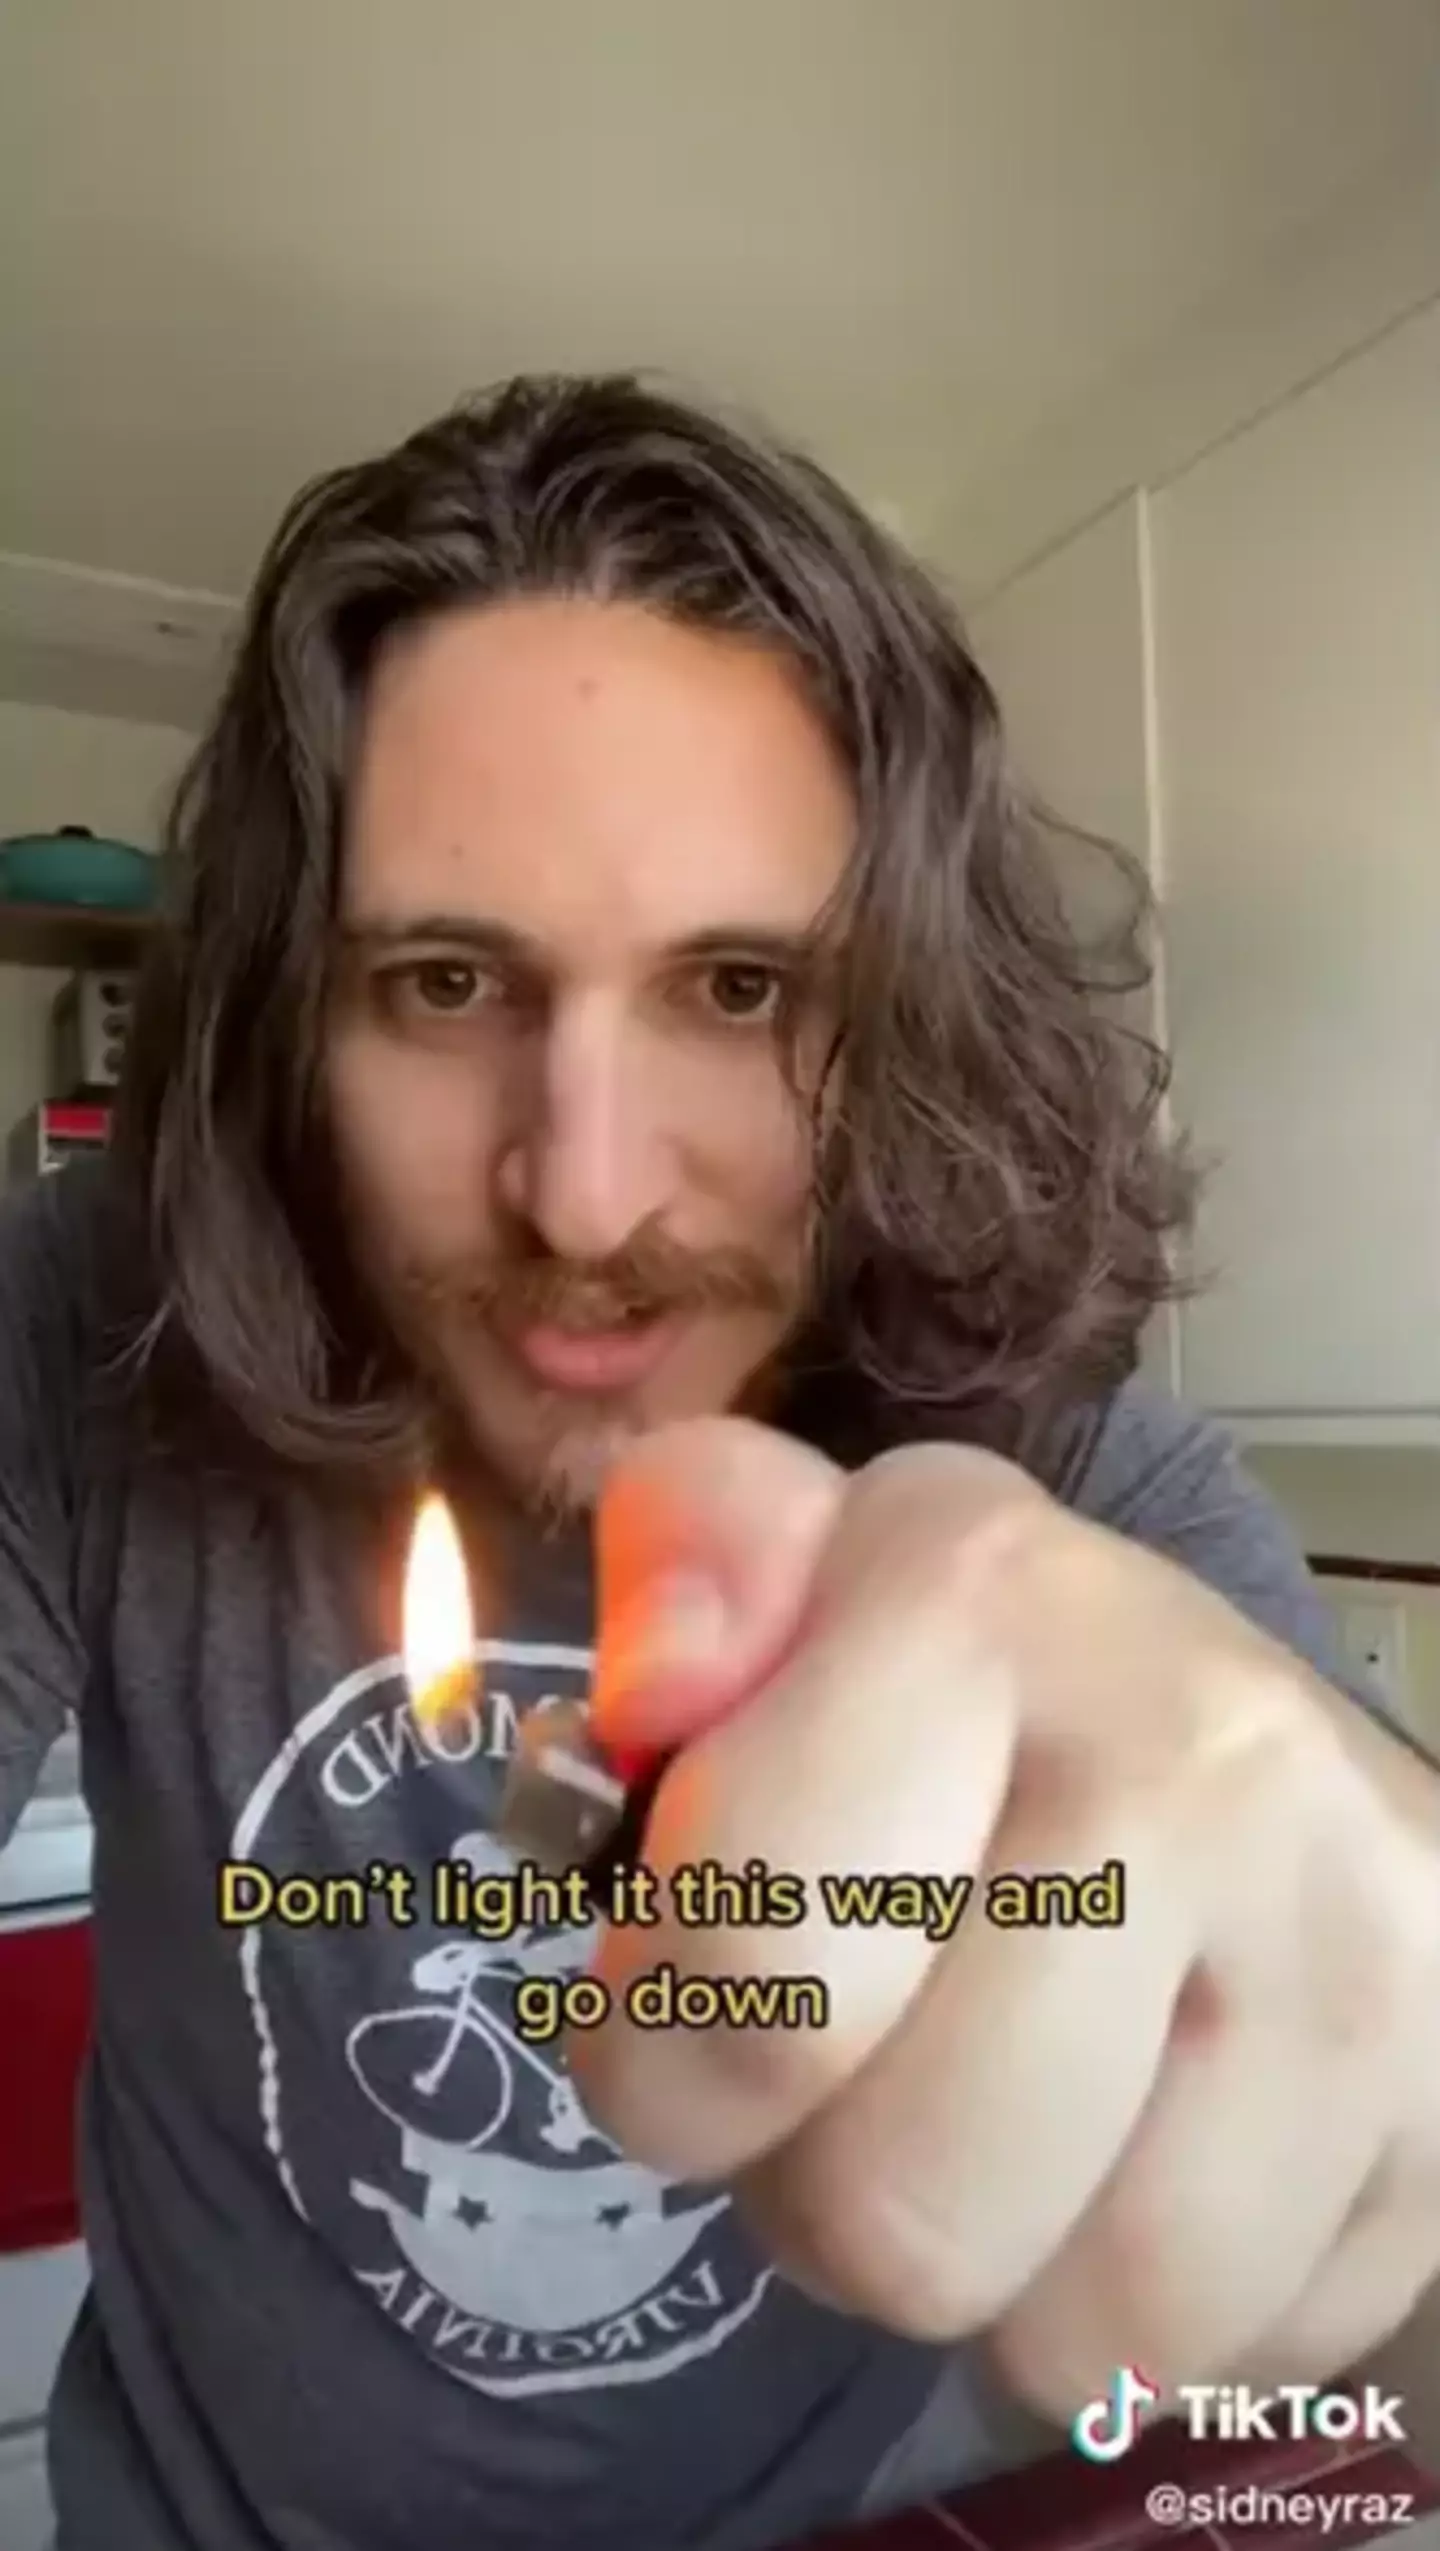 The man shared a safer way to use a lighter.